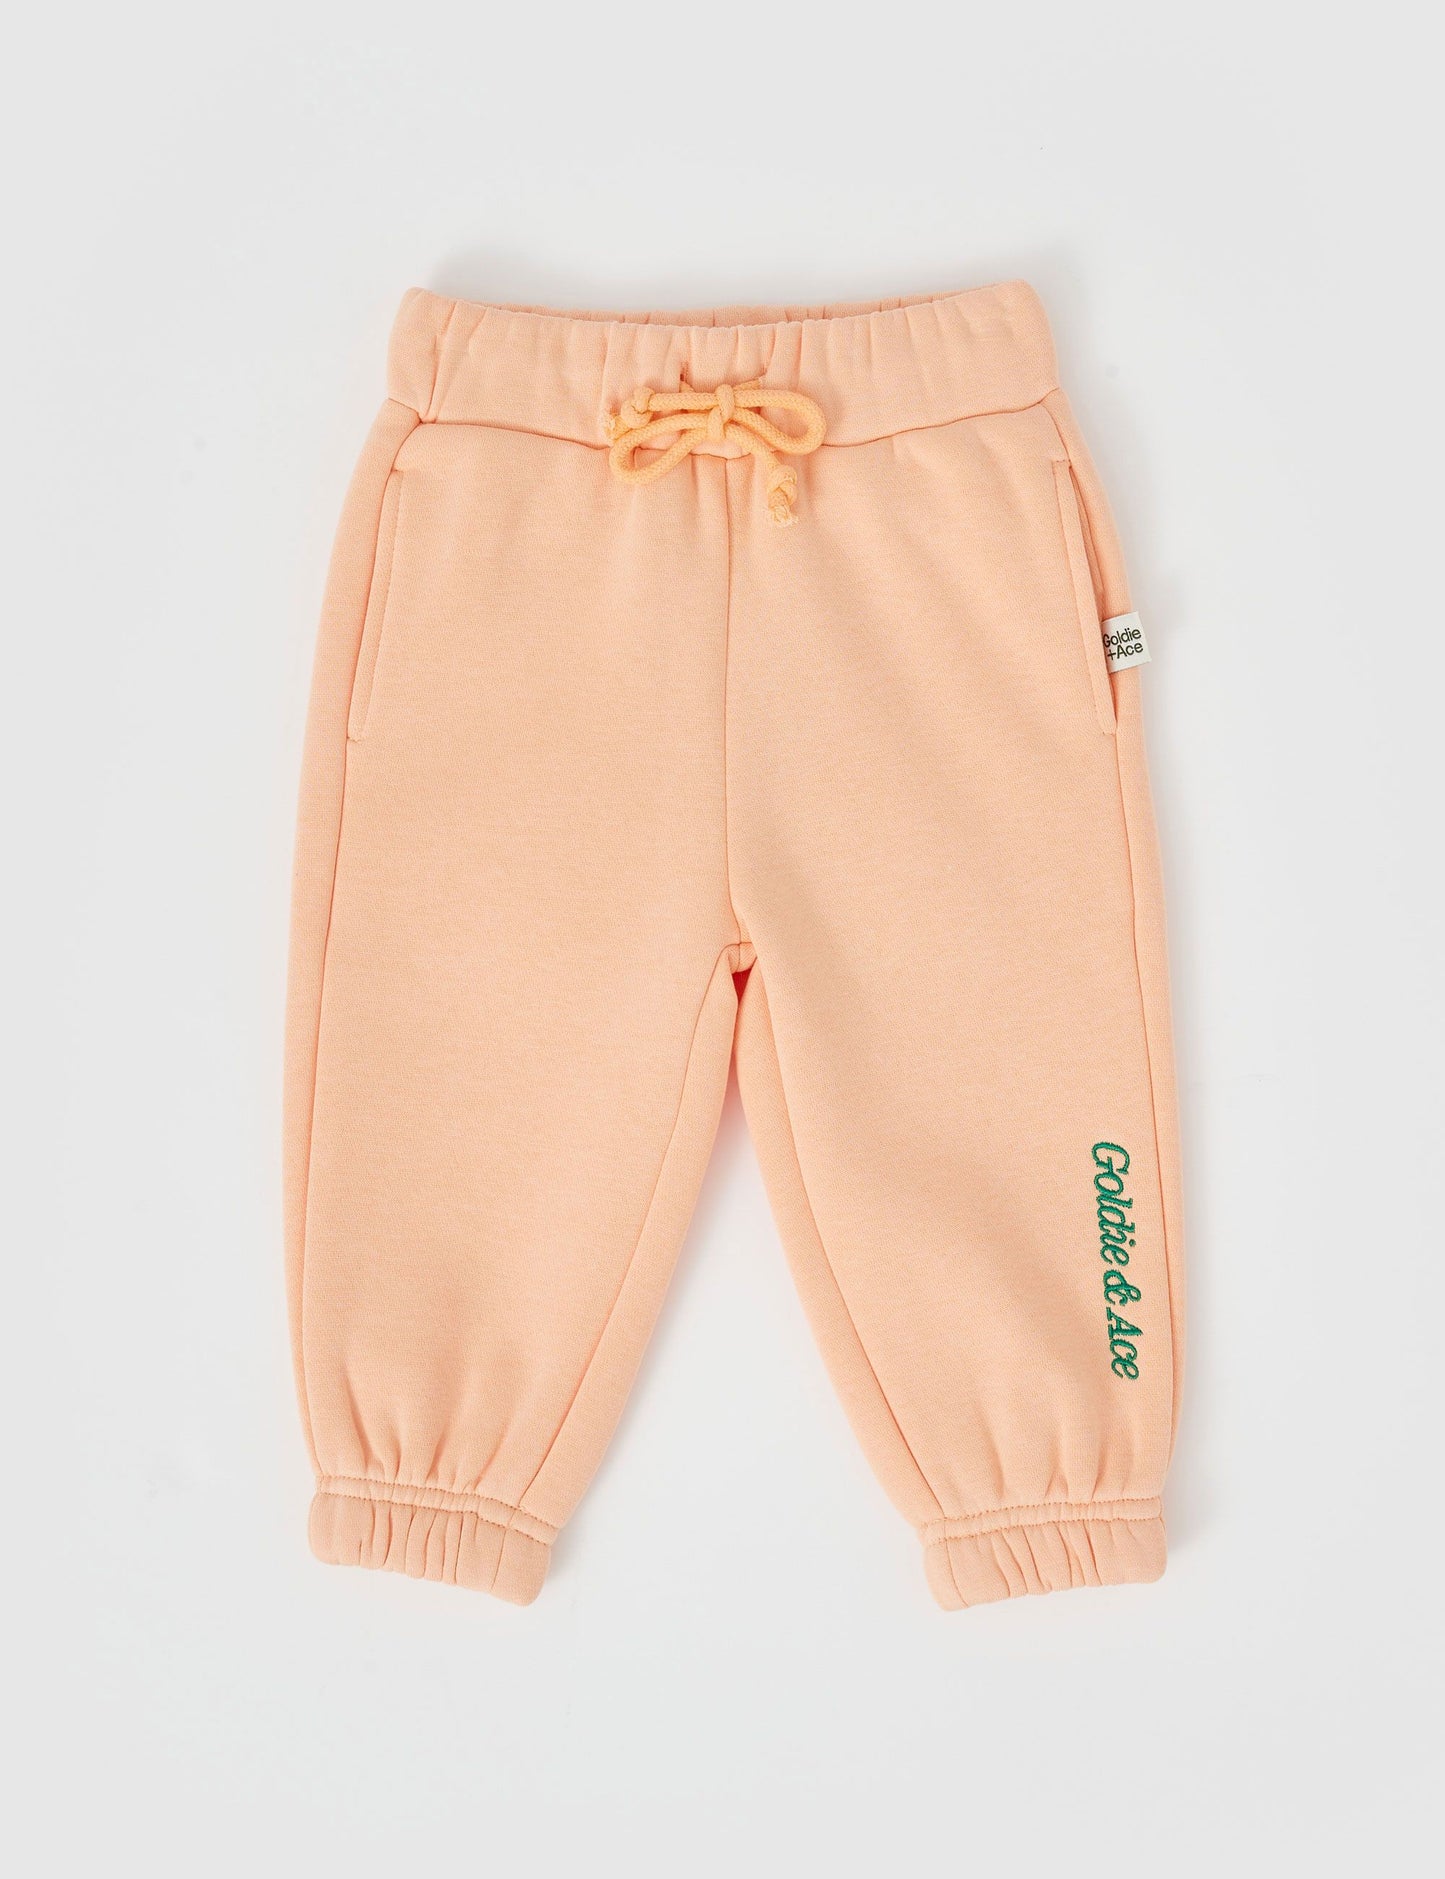 Goldie + Ace - Dylan Sweatpants (Peach)